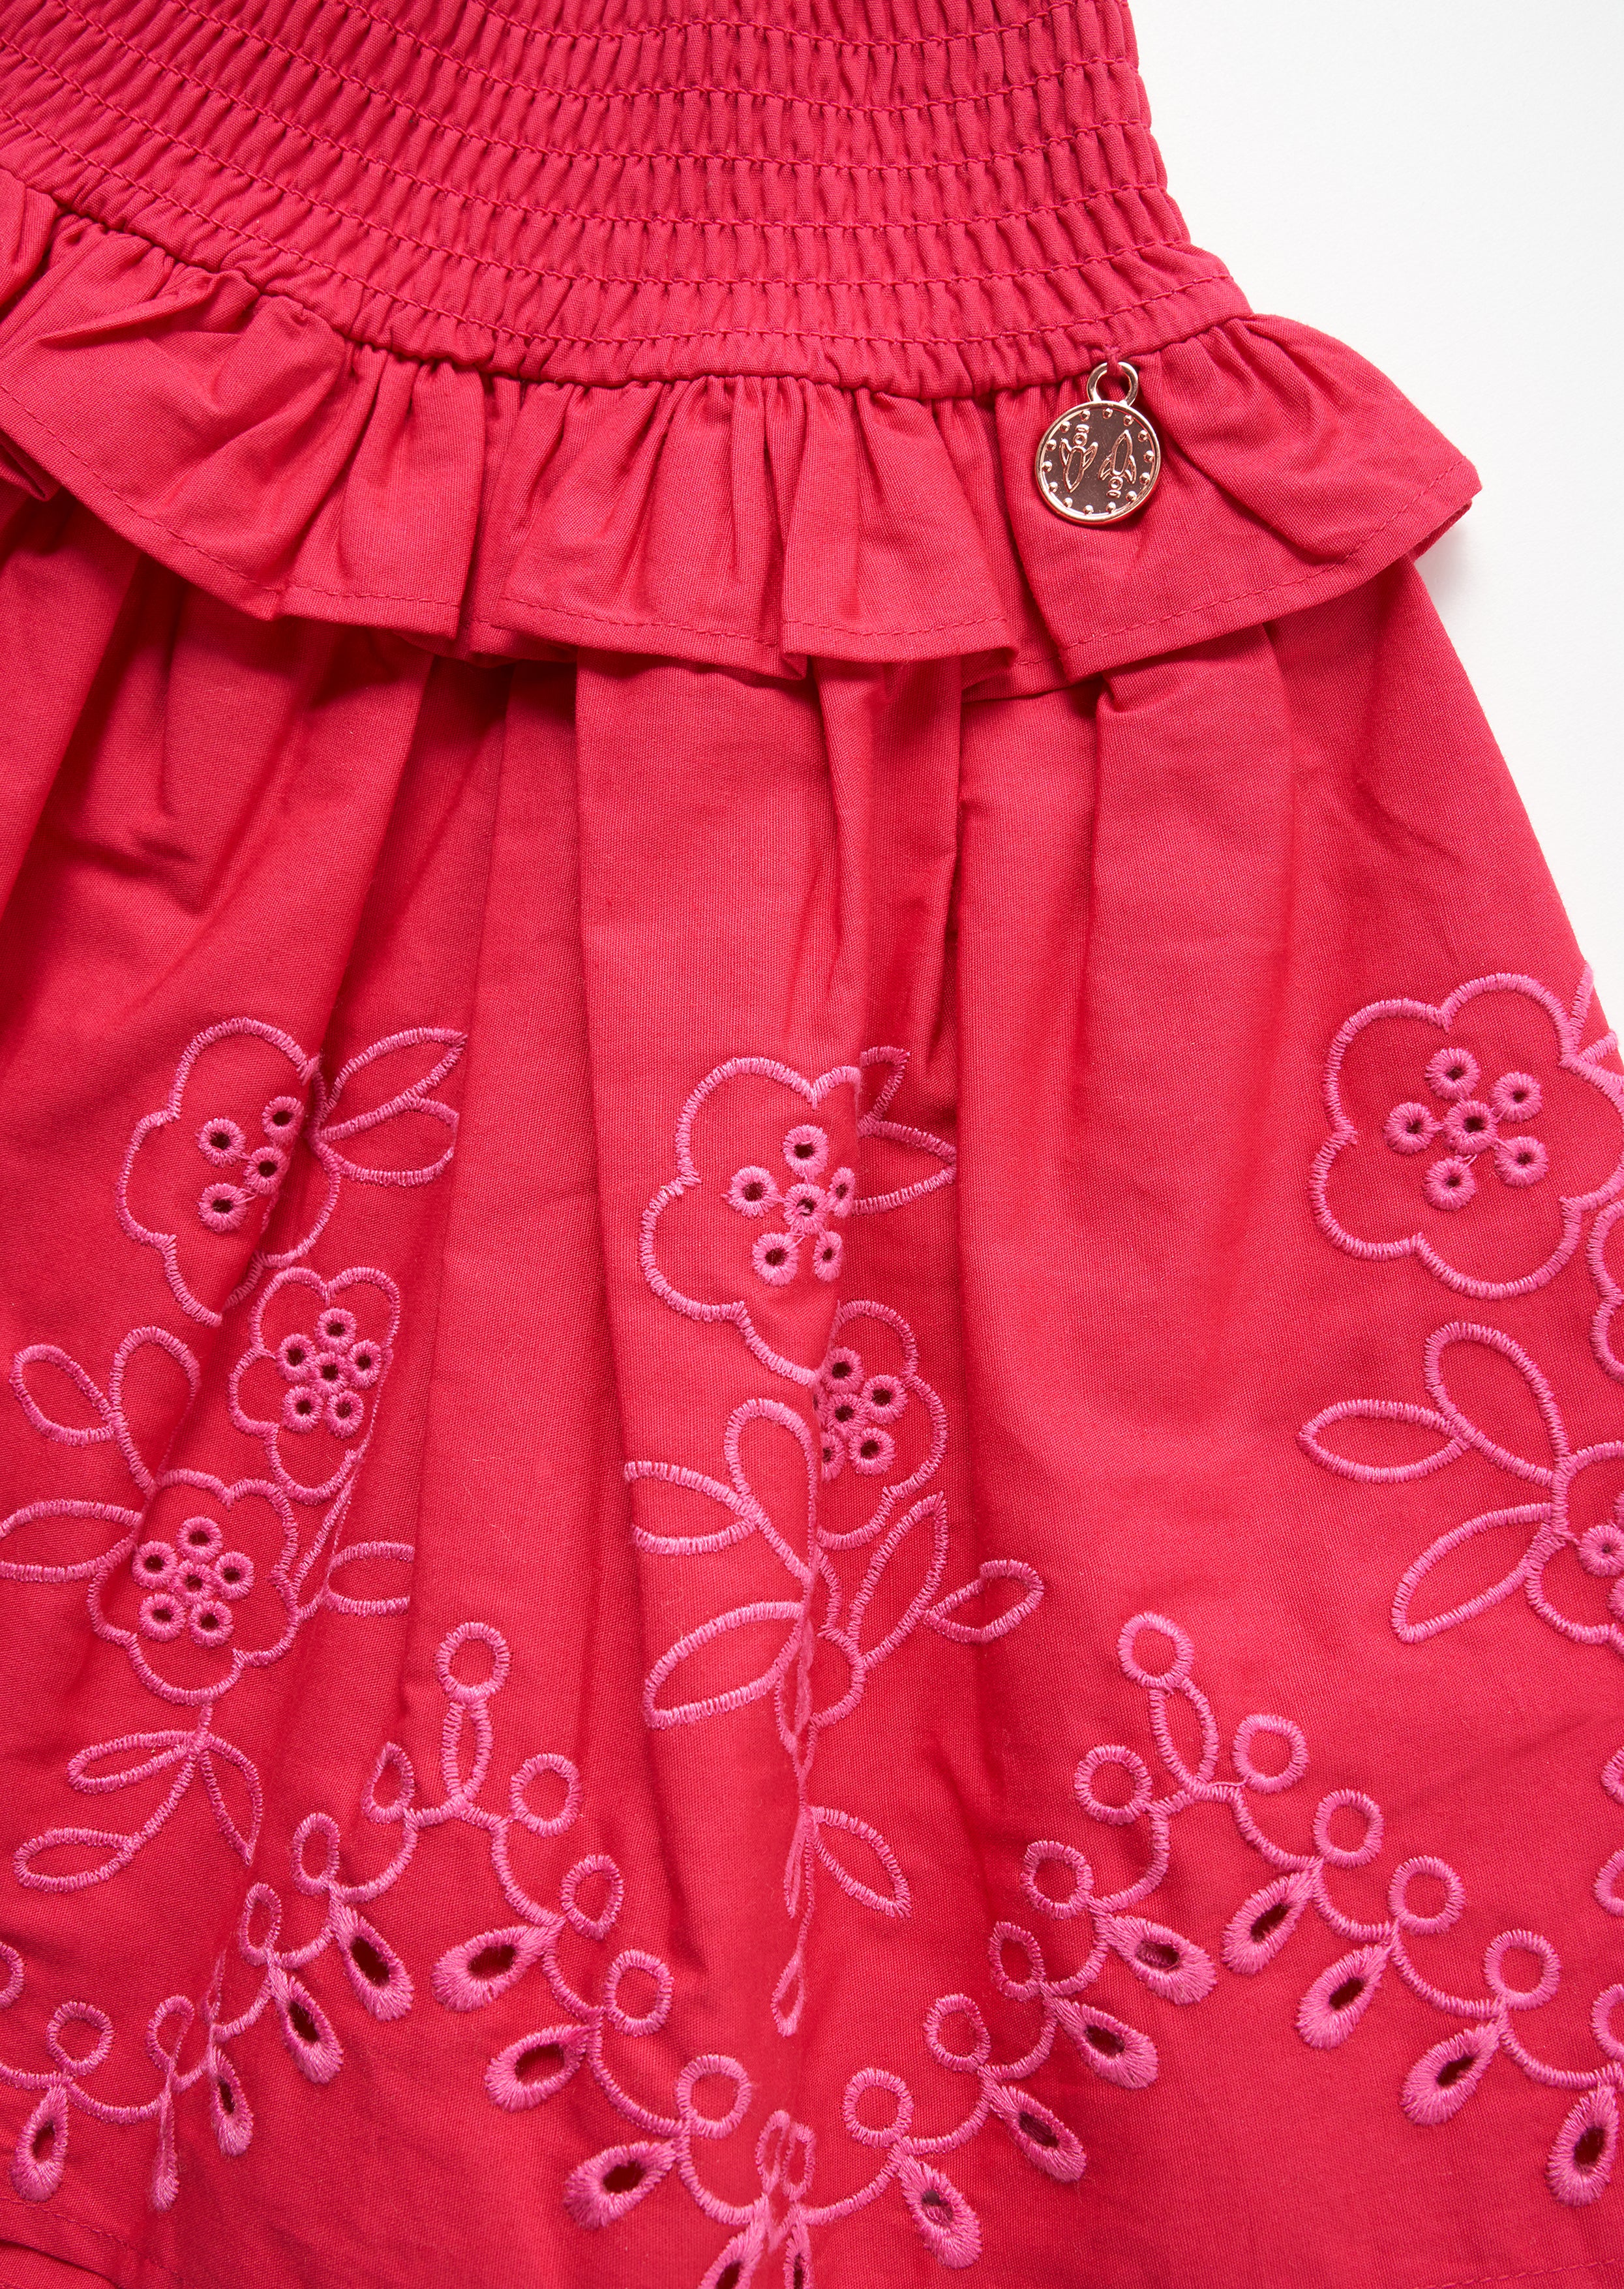 Girls Floral Embroidered Pink Skirt